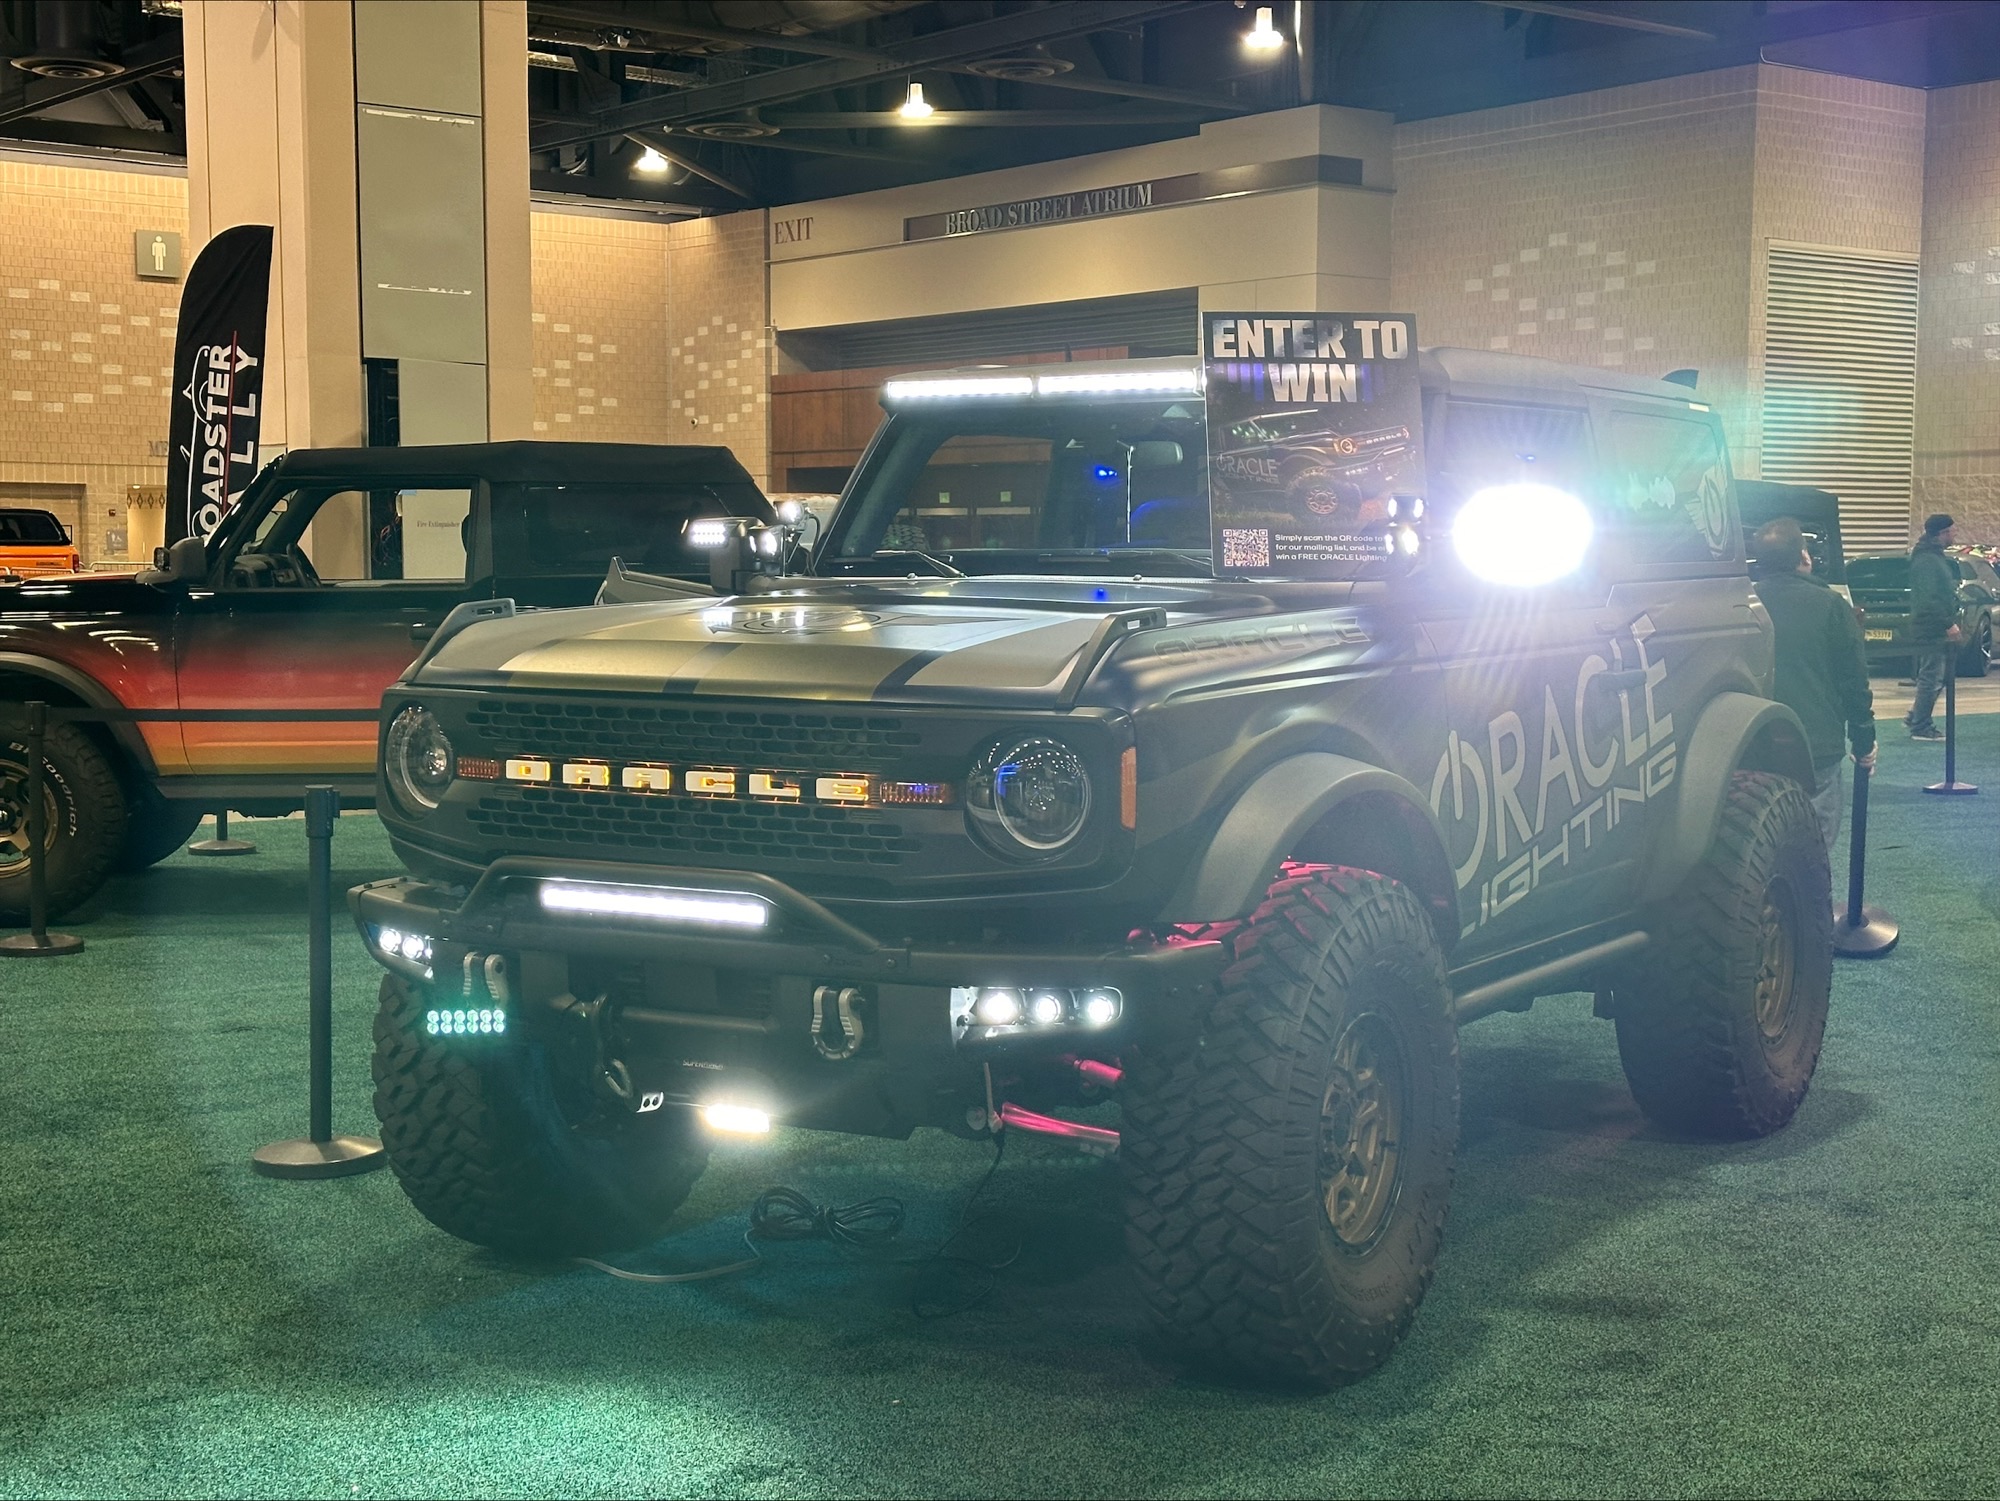 Ford Bronco 🎇LASER Auxiliary + LED Fog Light Kit 🎇New Bronco Product Debuting at SEMA by ORACLE Lighting processed-22CE6710-DC25-4627-8939-B25A8898ECBF